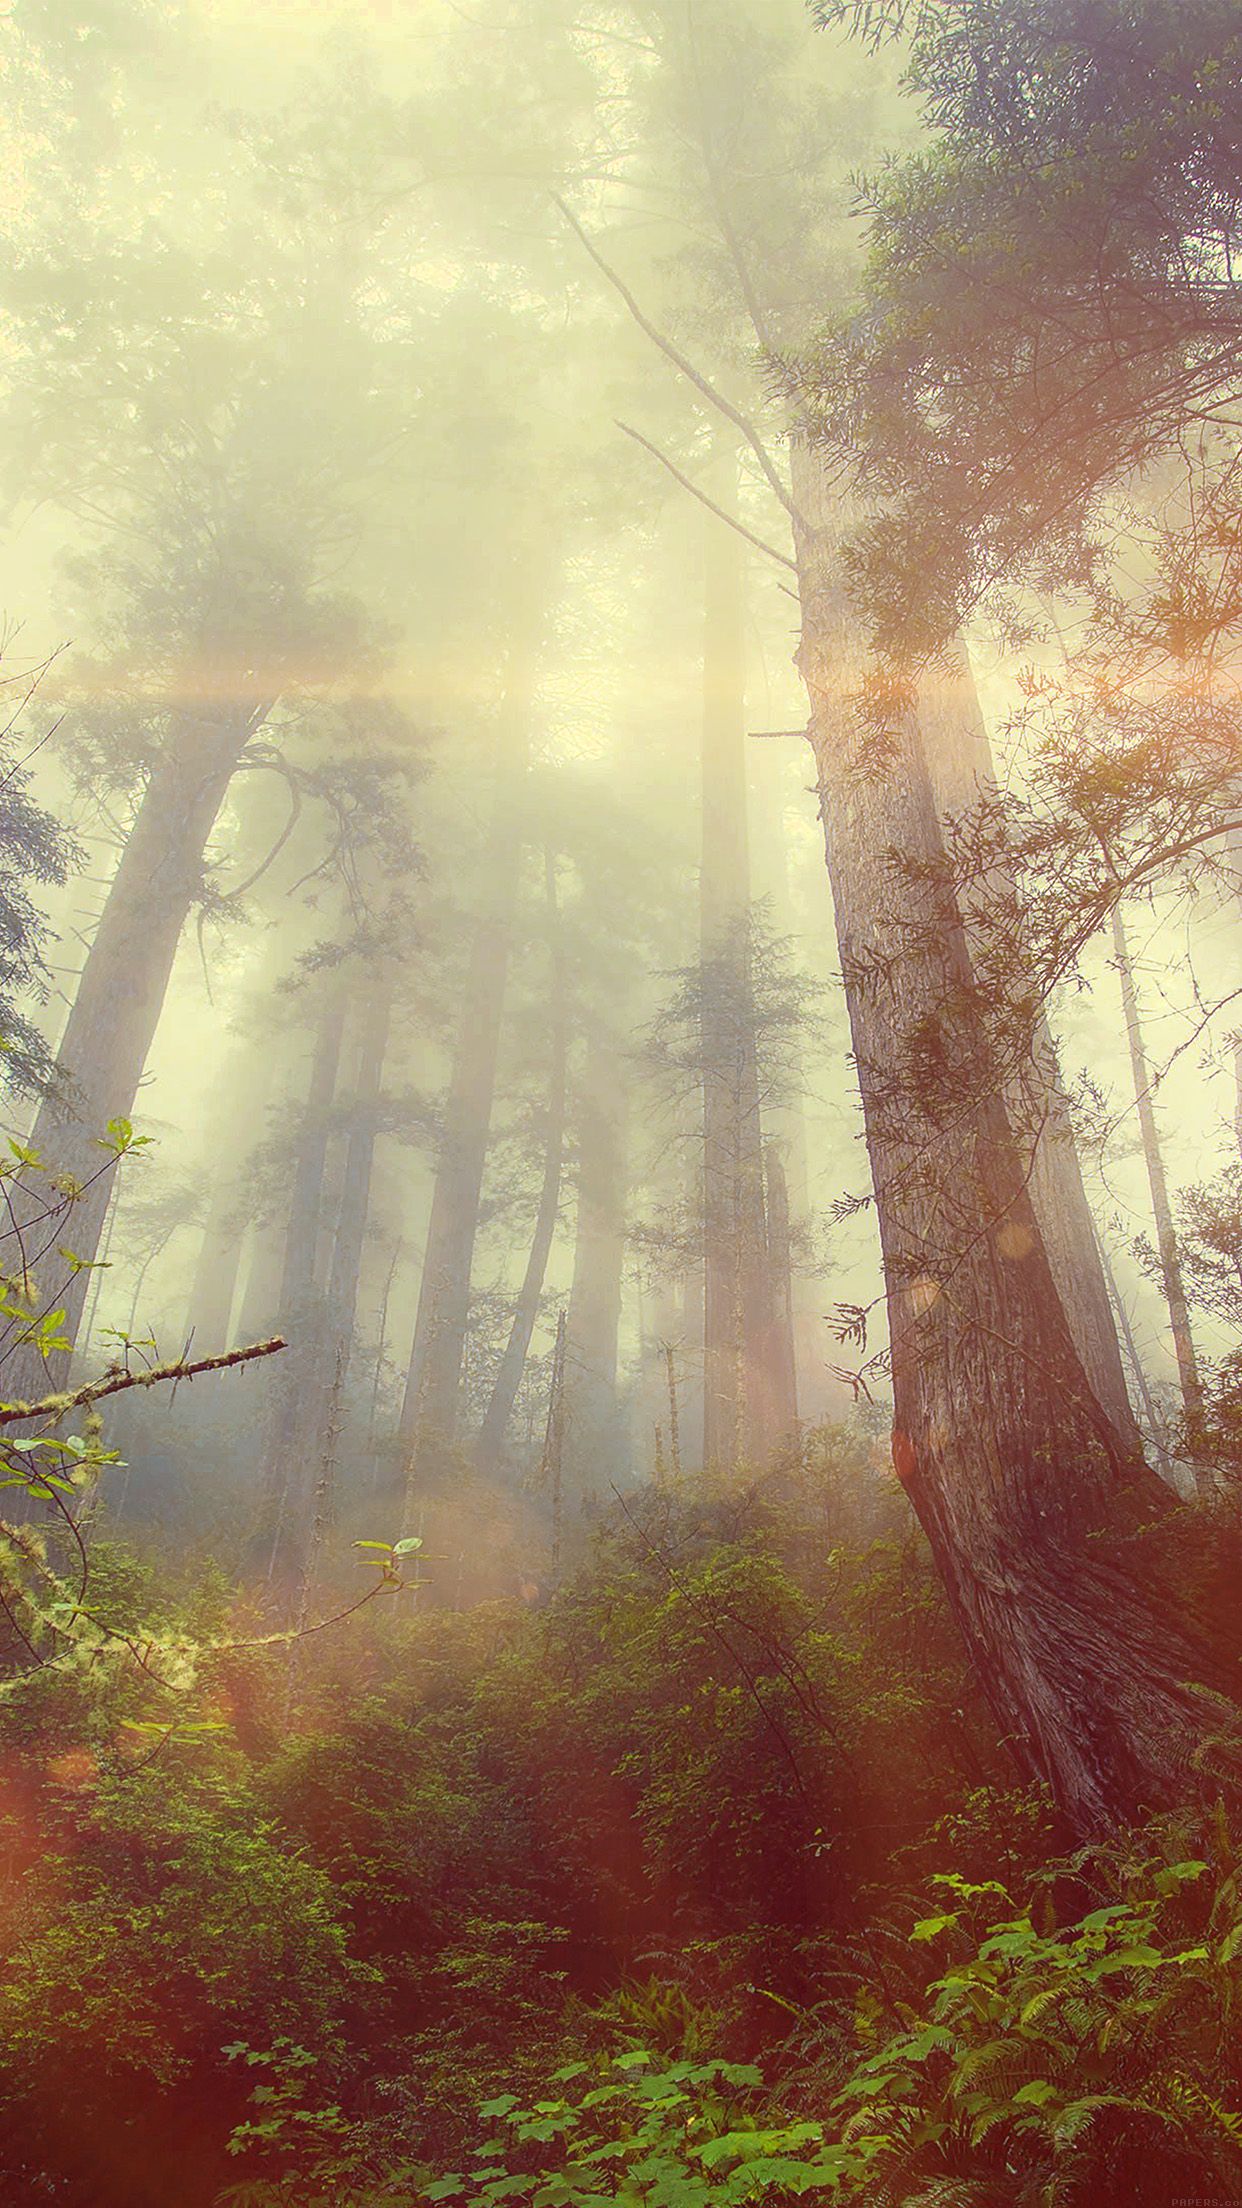 A forest with tall trees and greenery - Fog, foggy forest